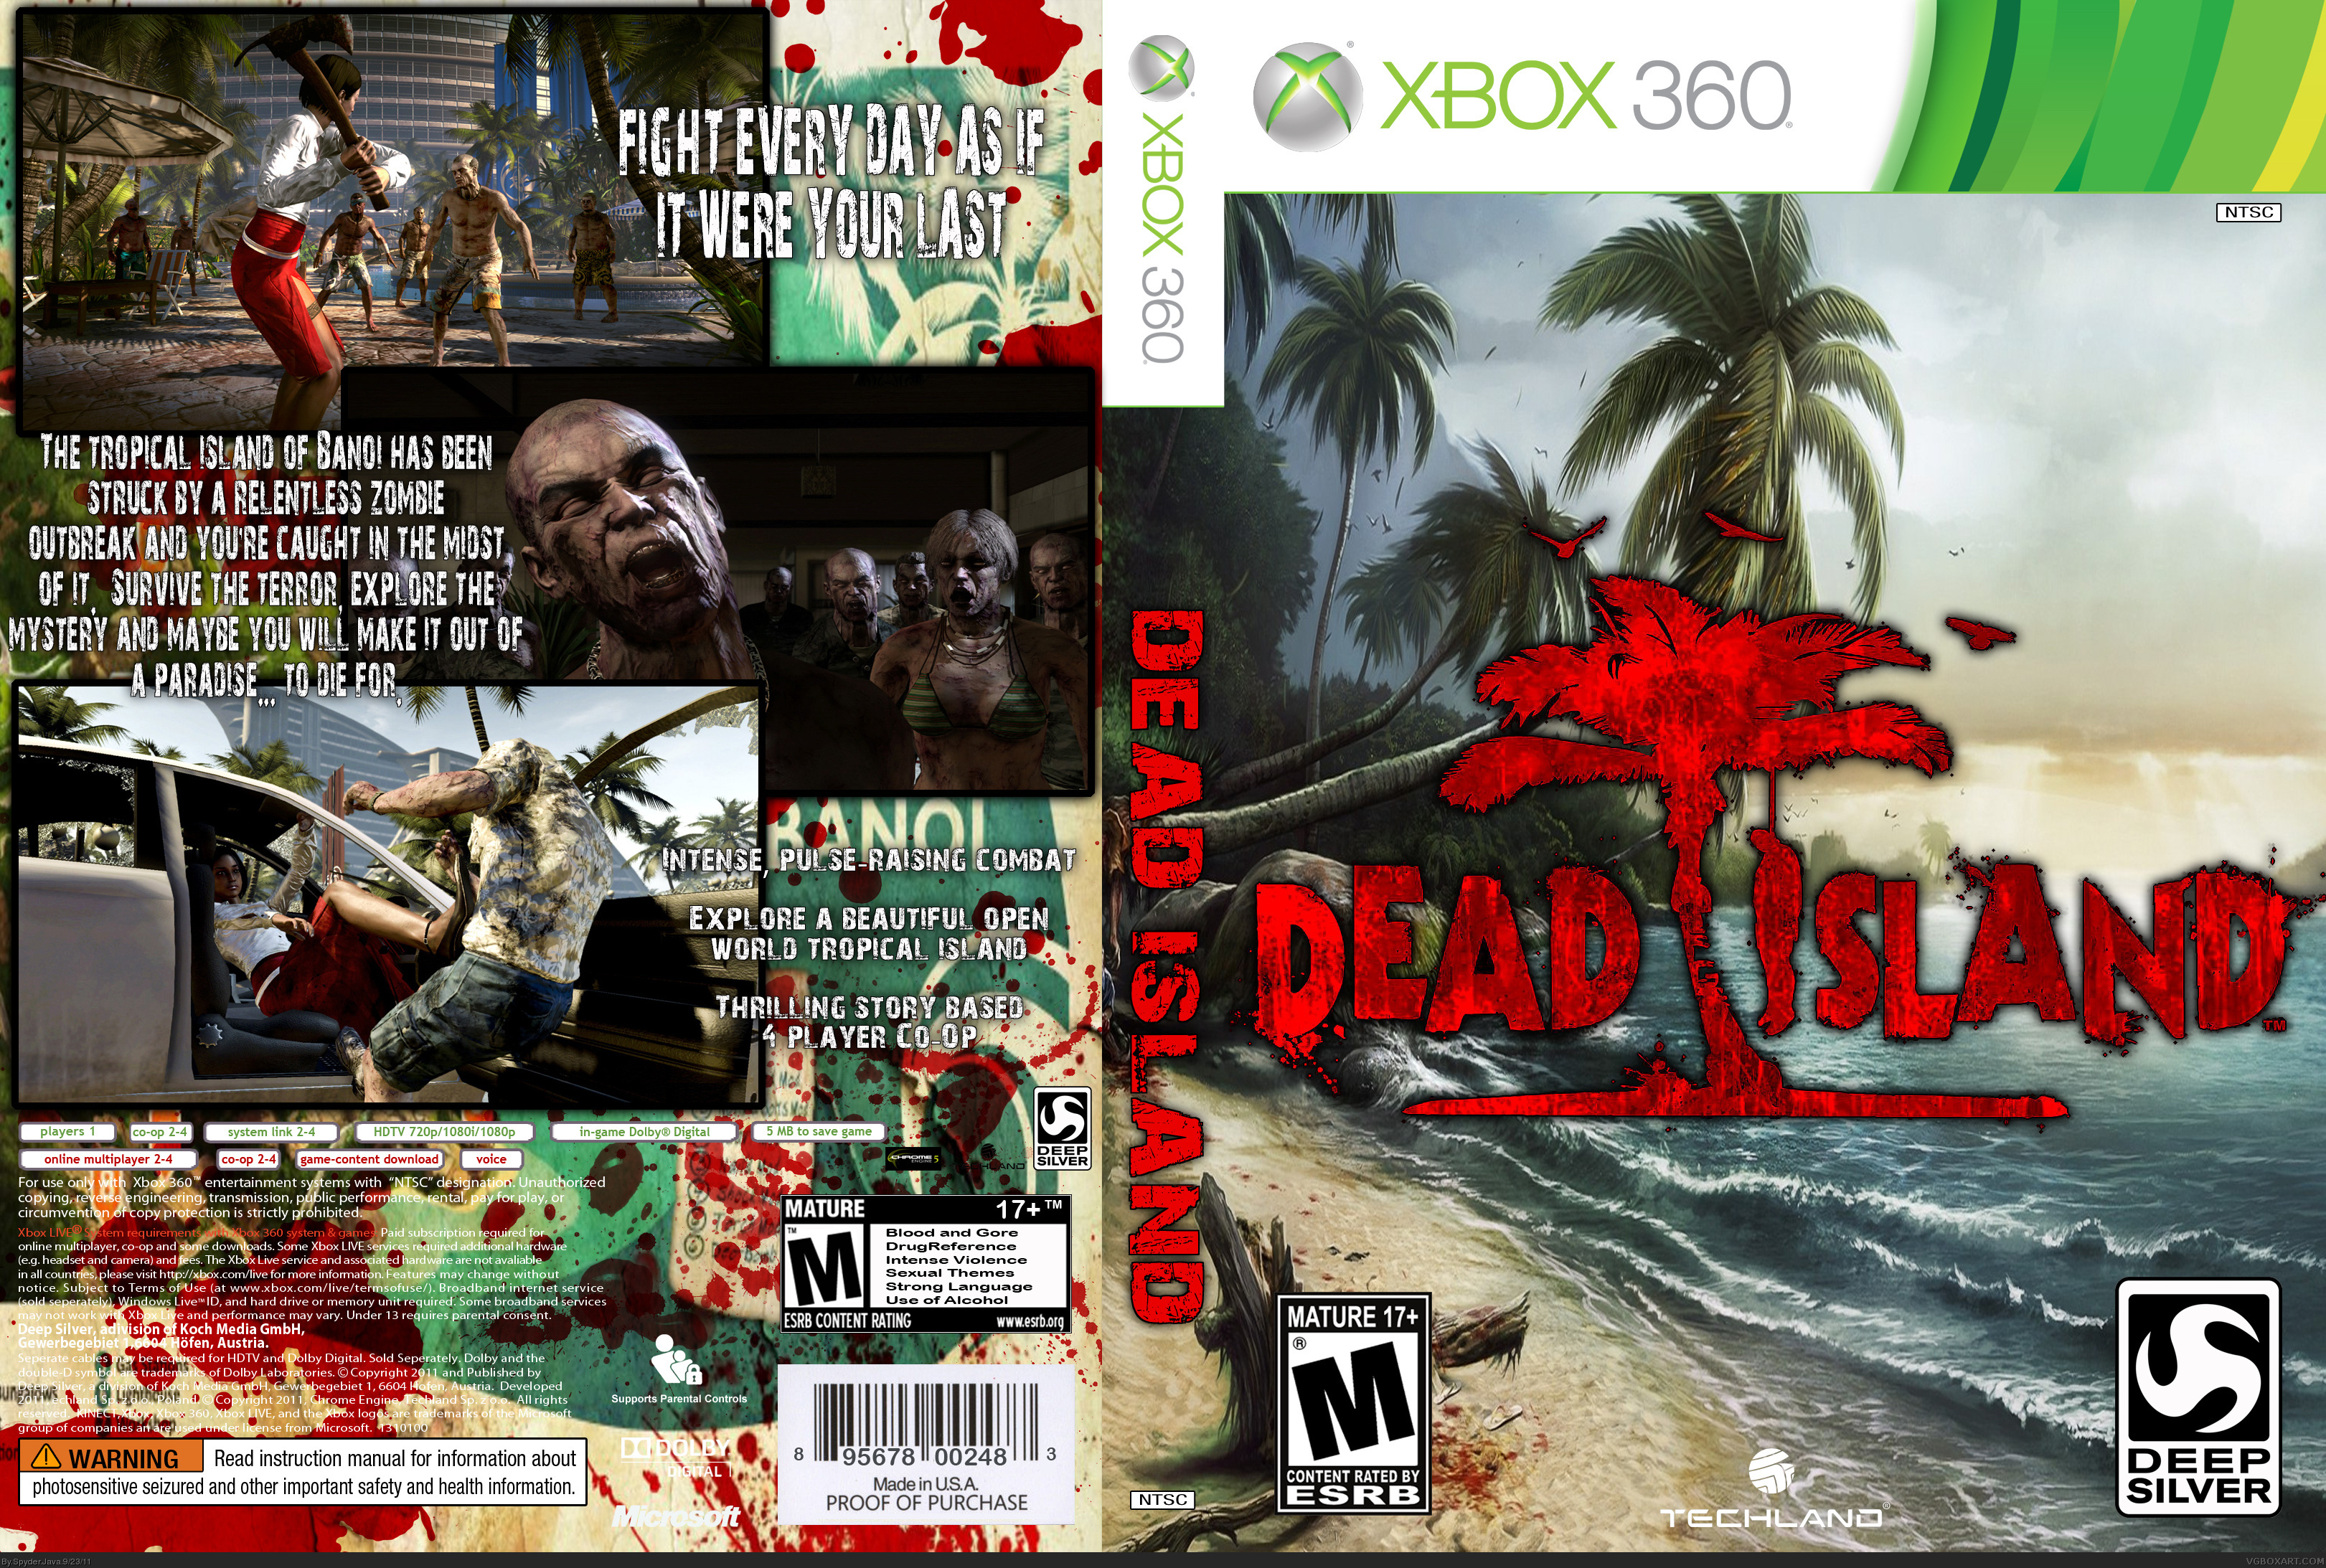 dead island 2 hell-a edition ps4